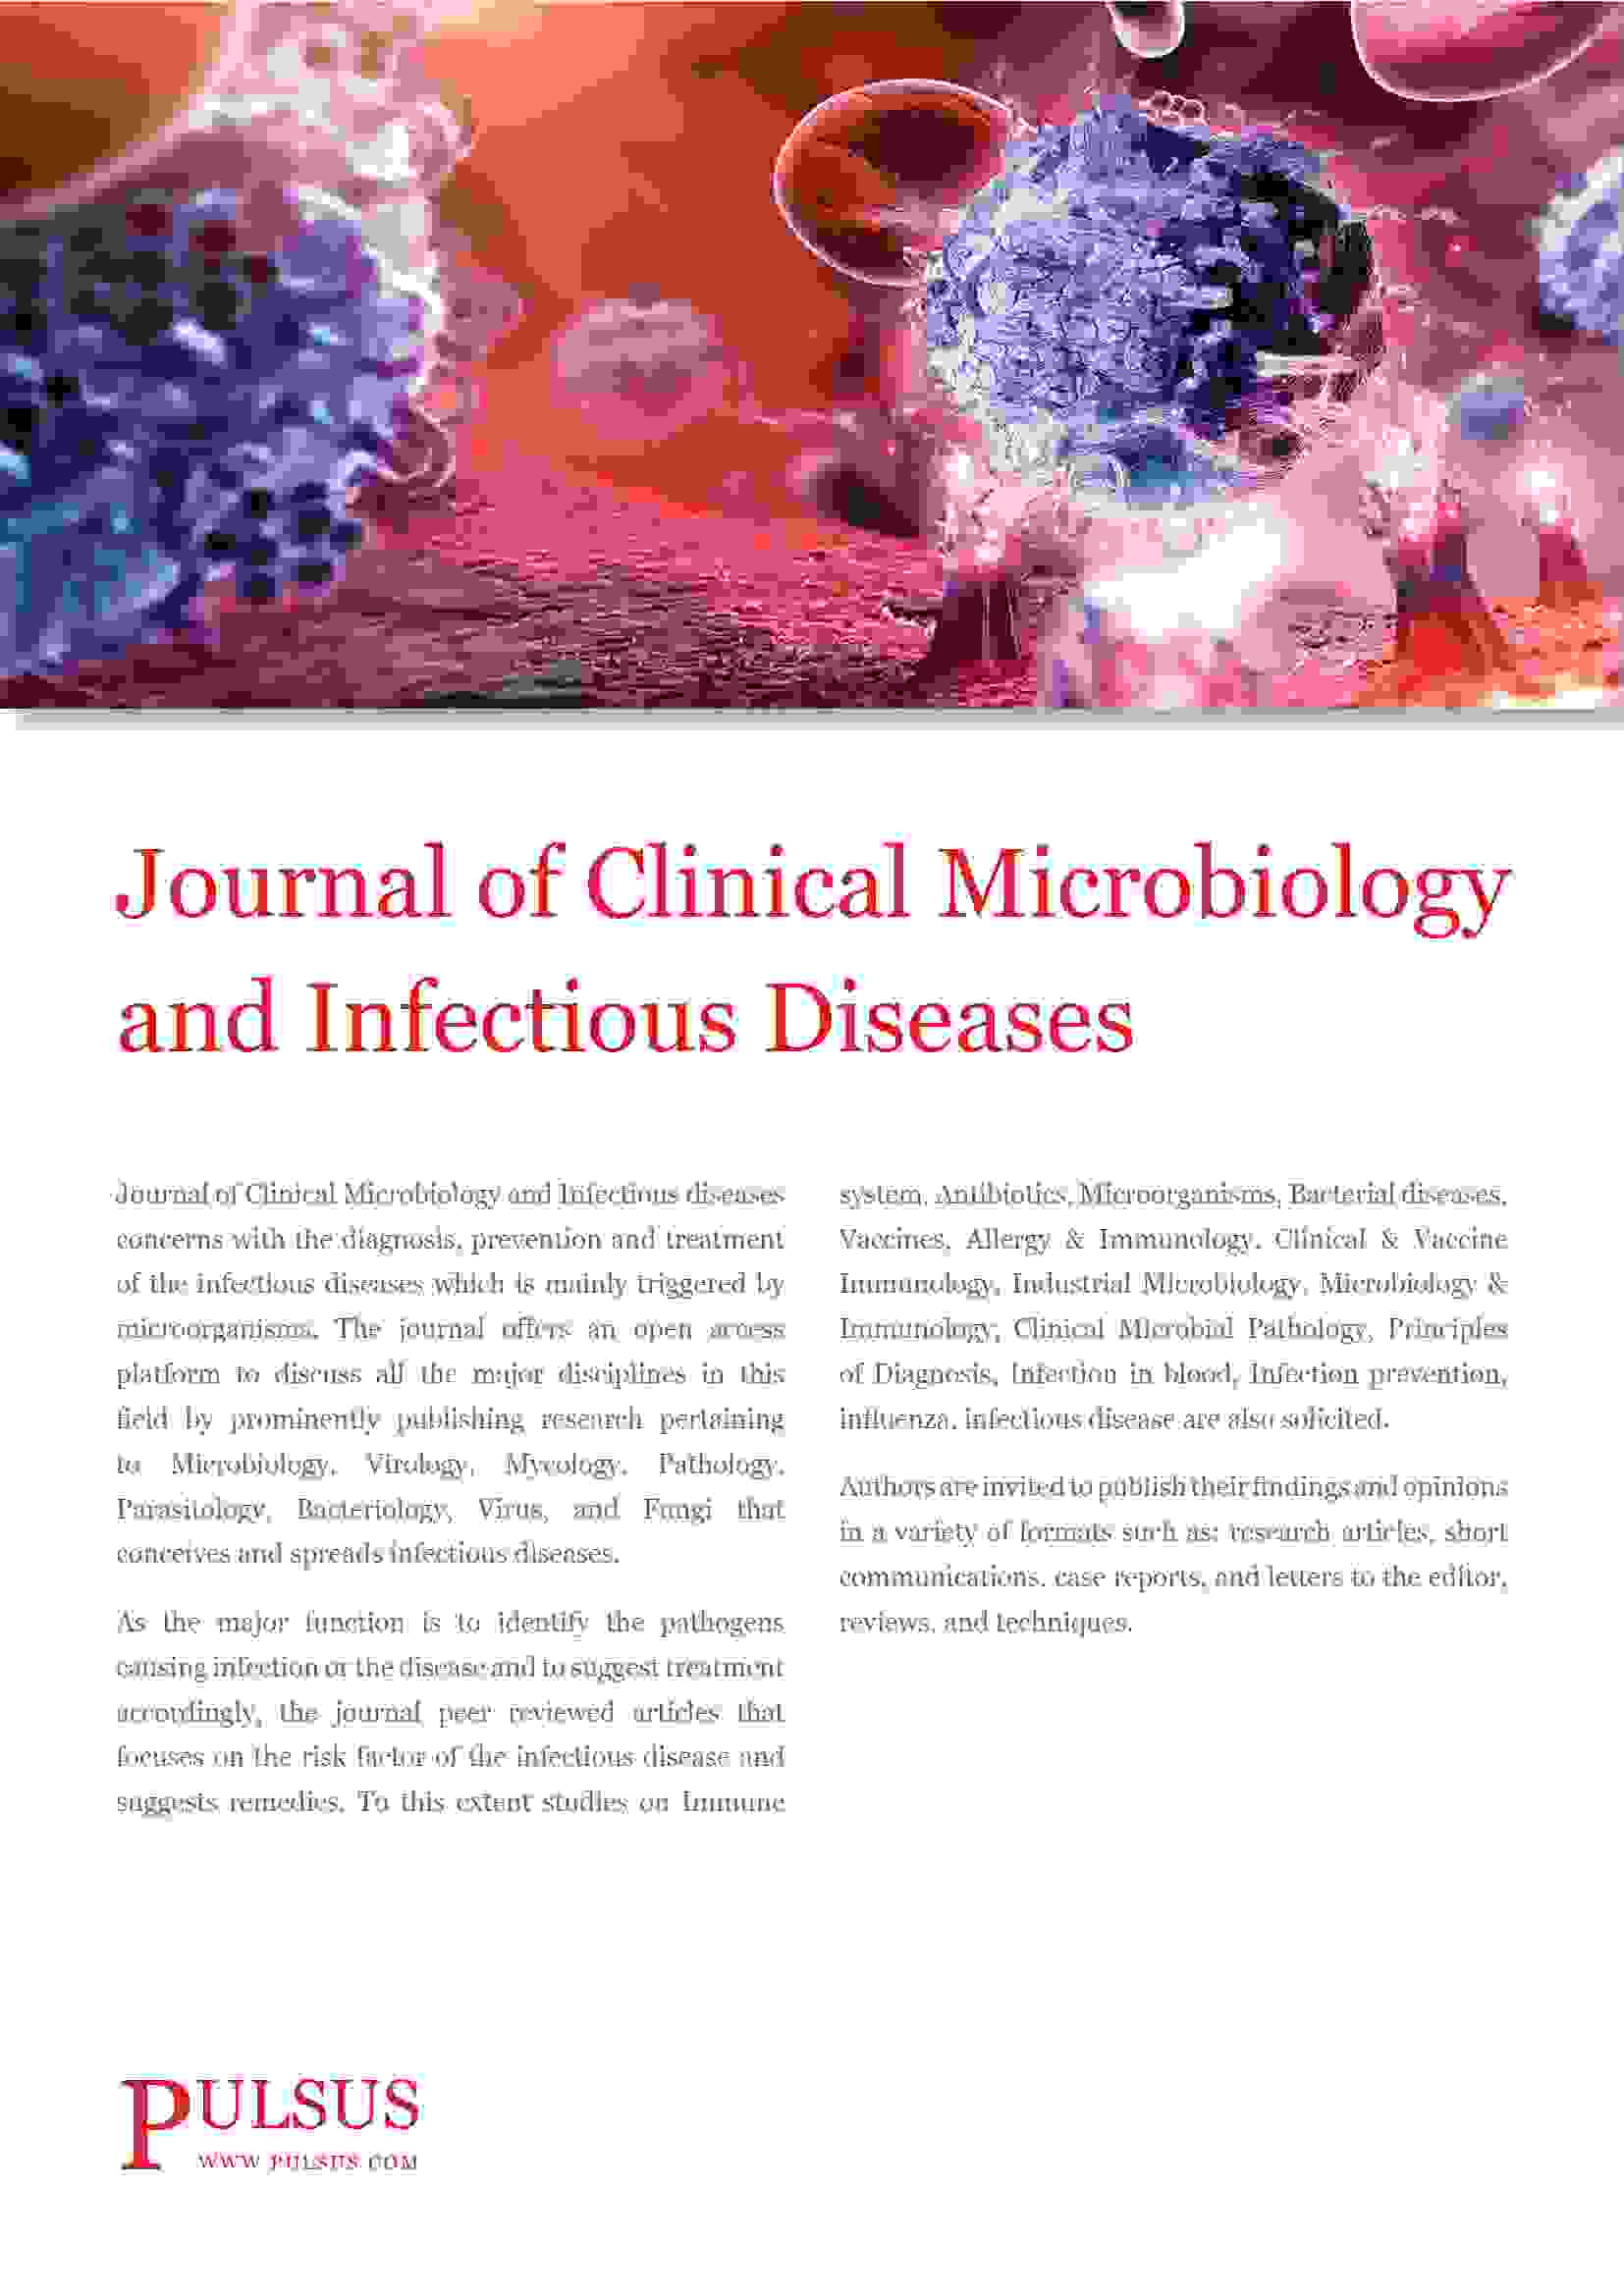 Journal of Clinical Microbiology and Infectious diseases